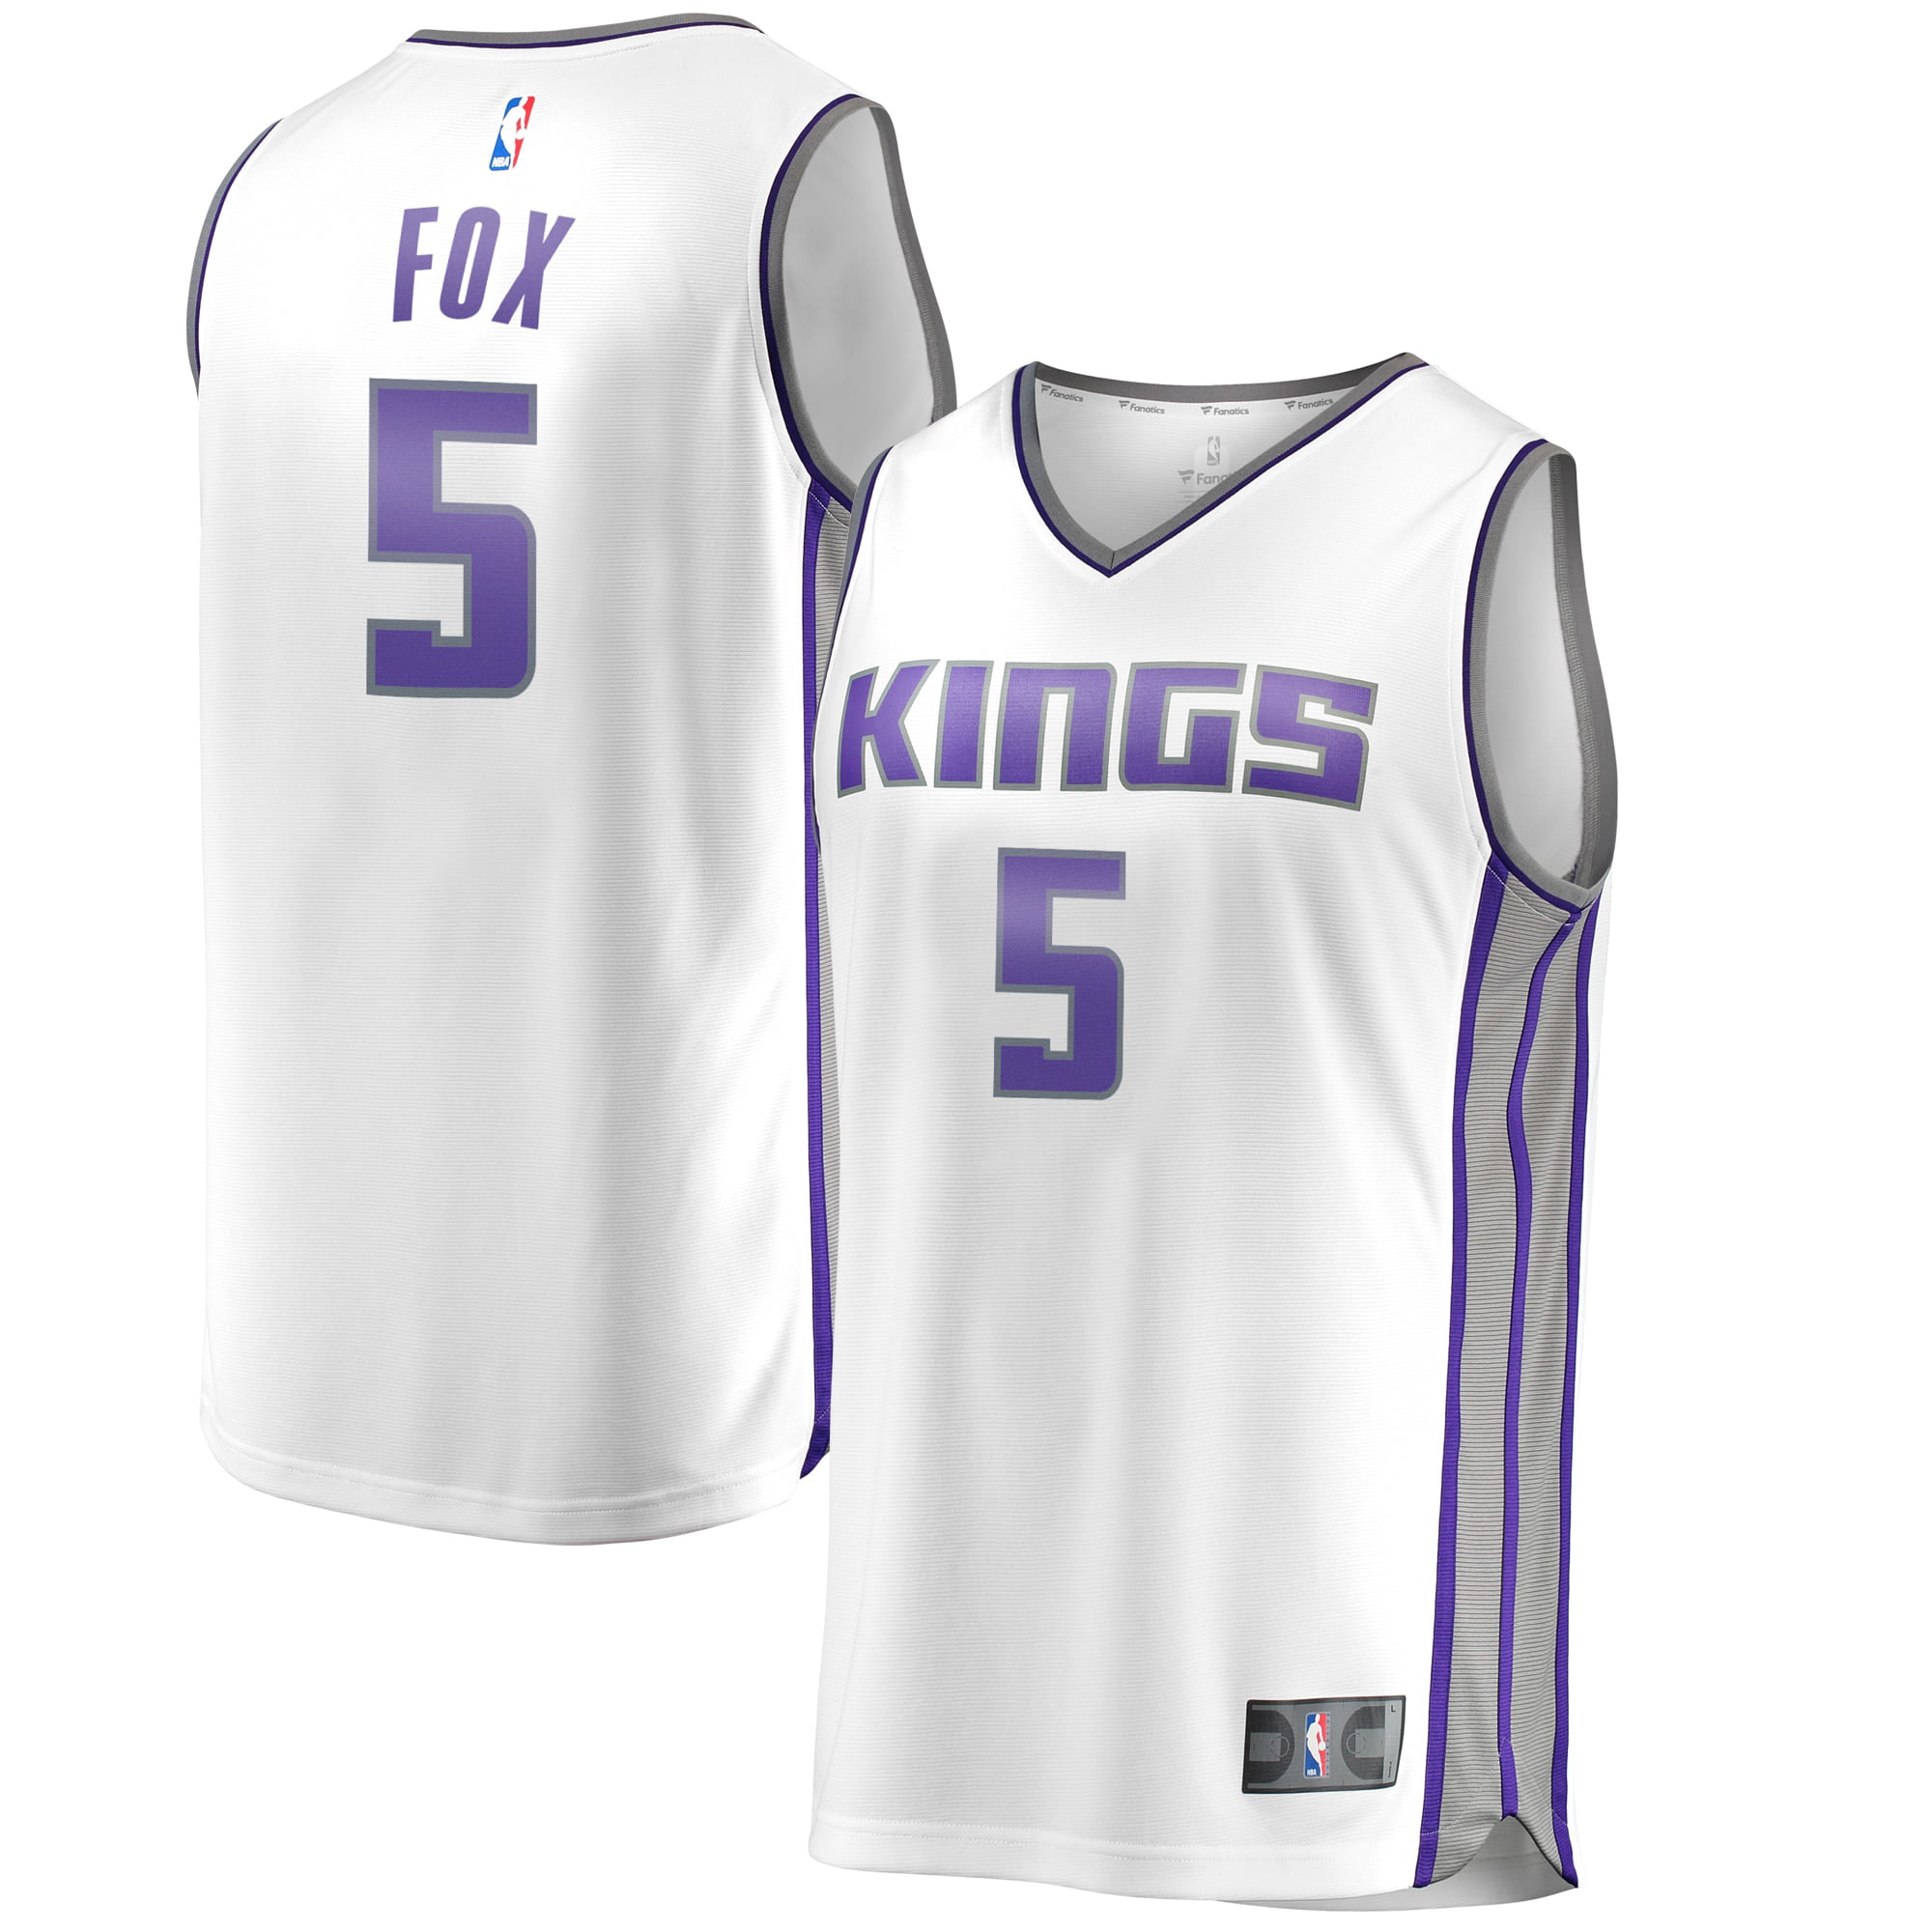 kings jersey youth